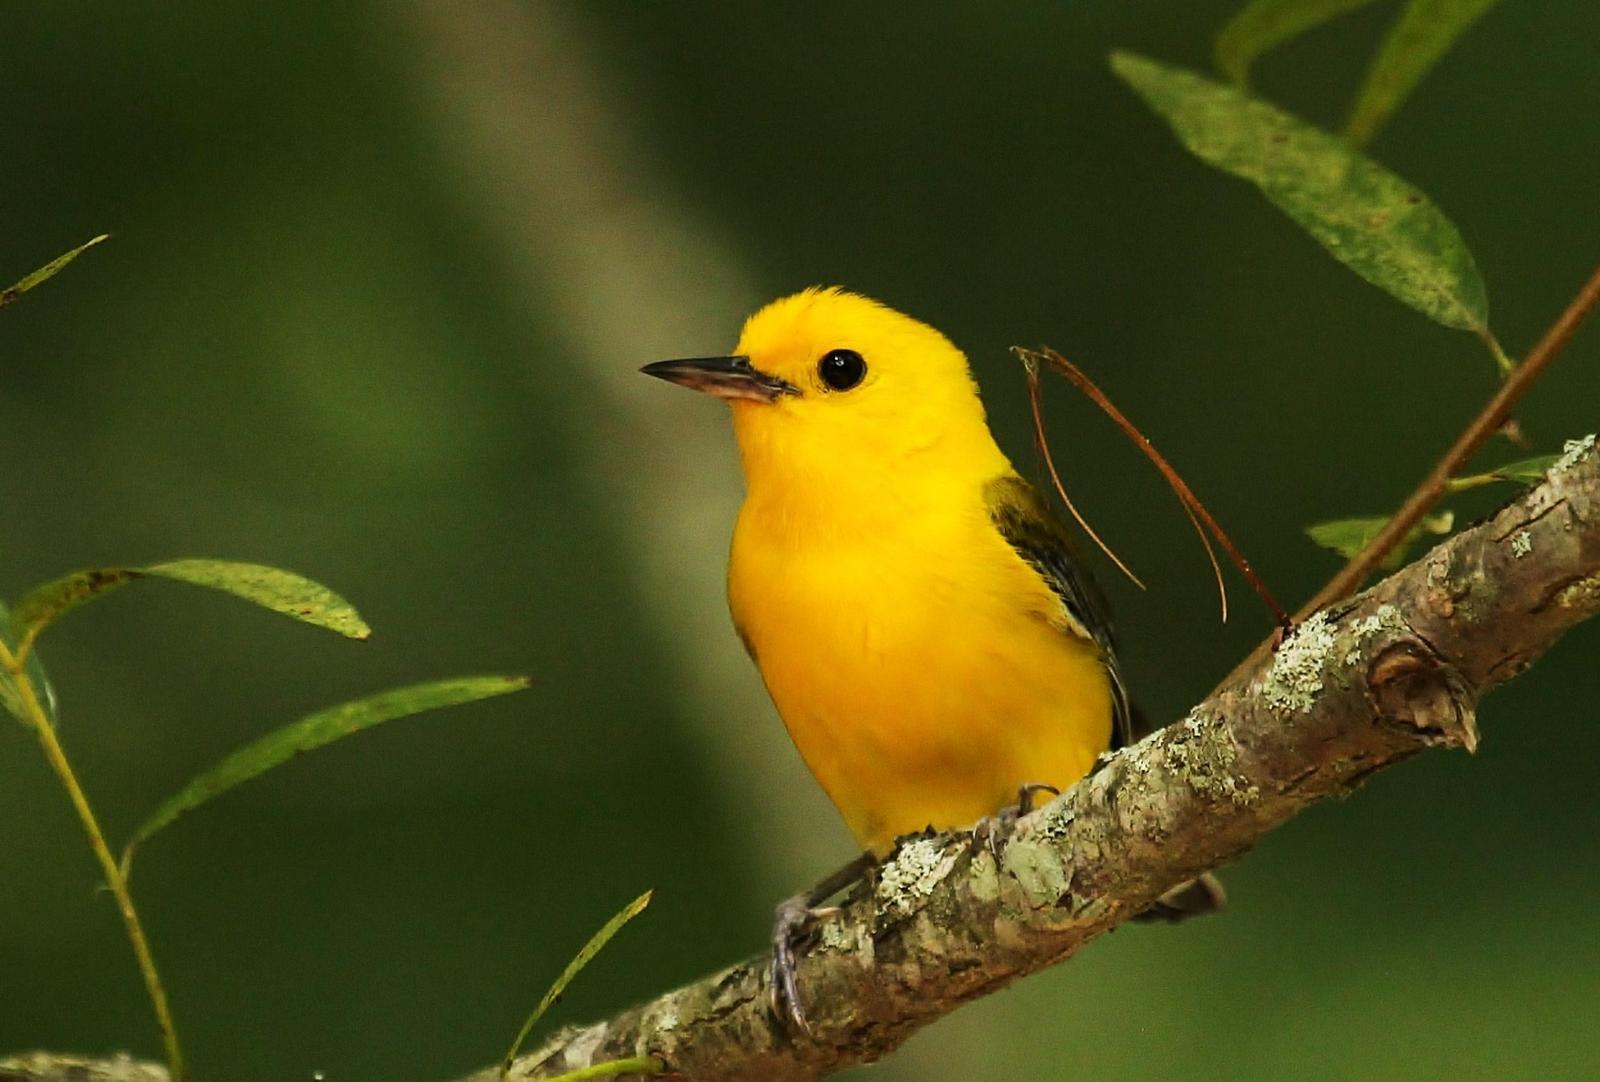 Prothonotary Warbler Photo by Matthew McCluskey